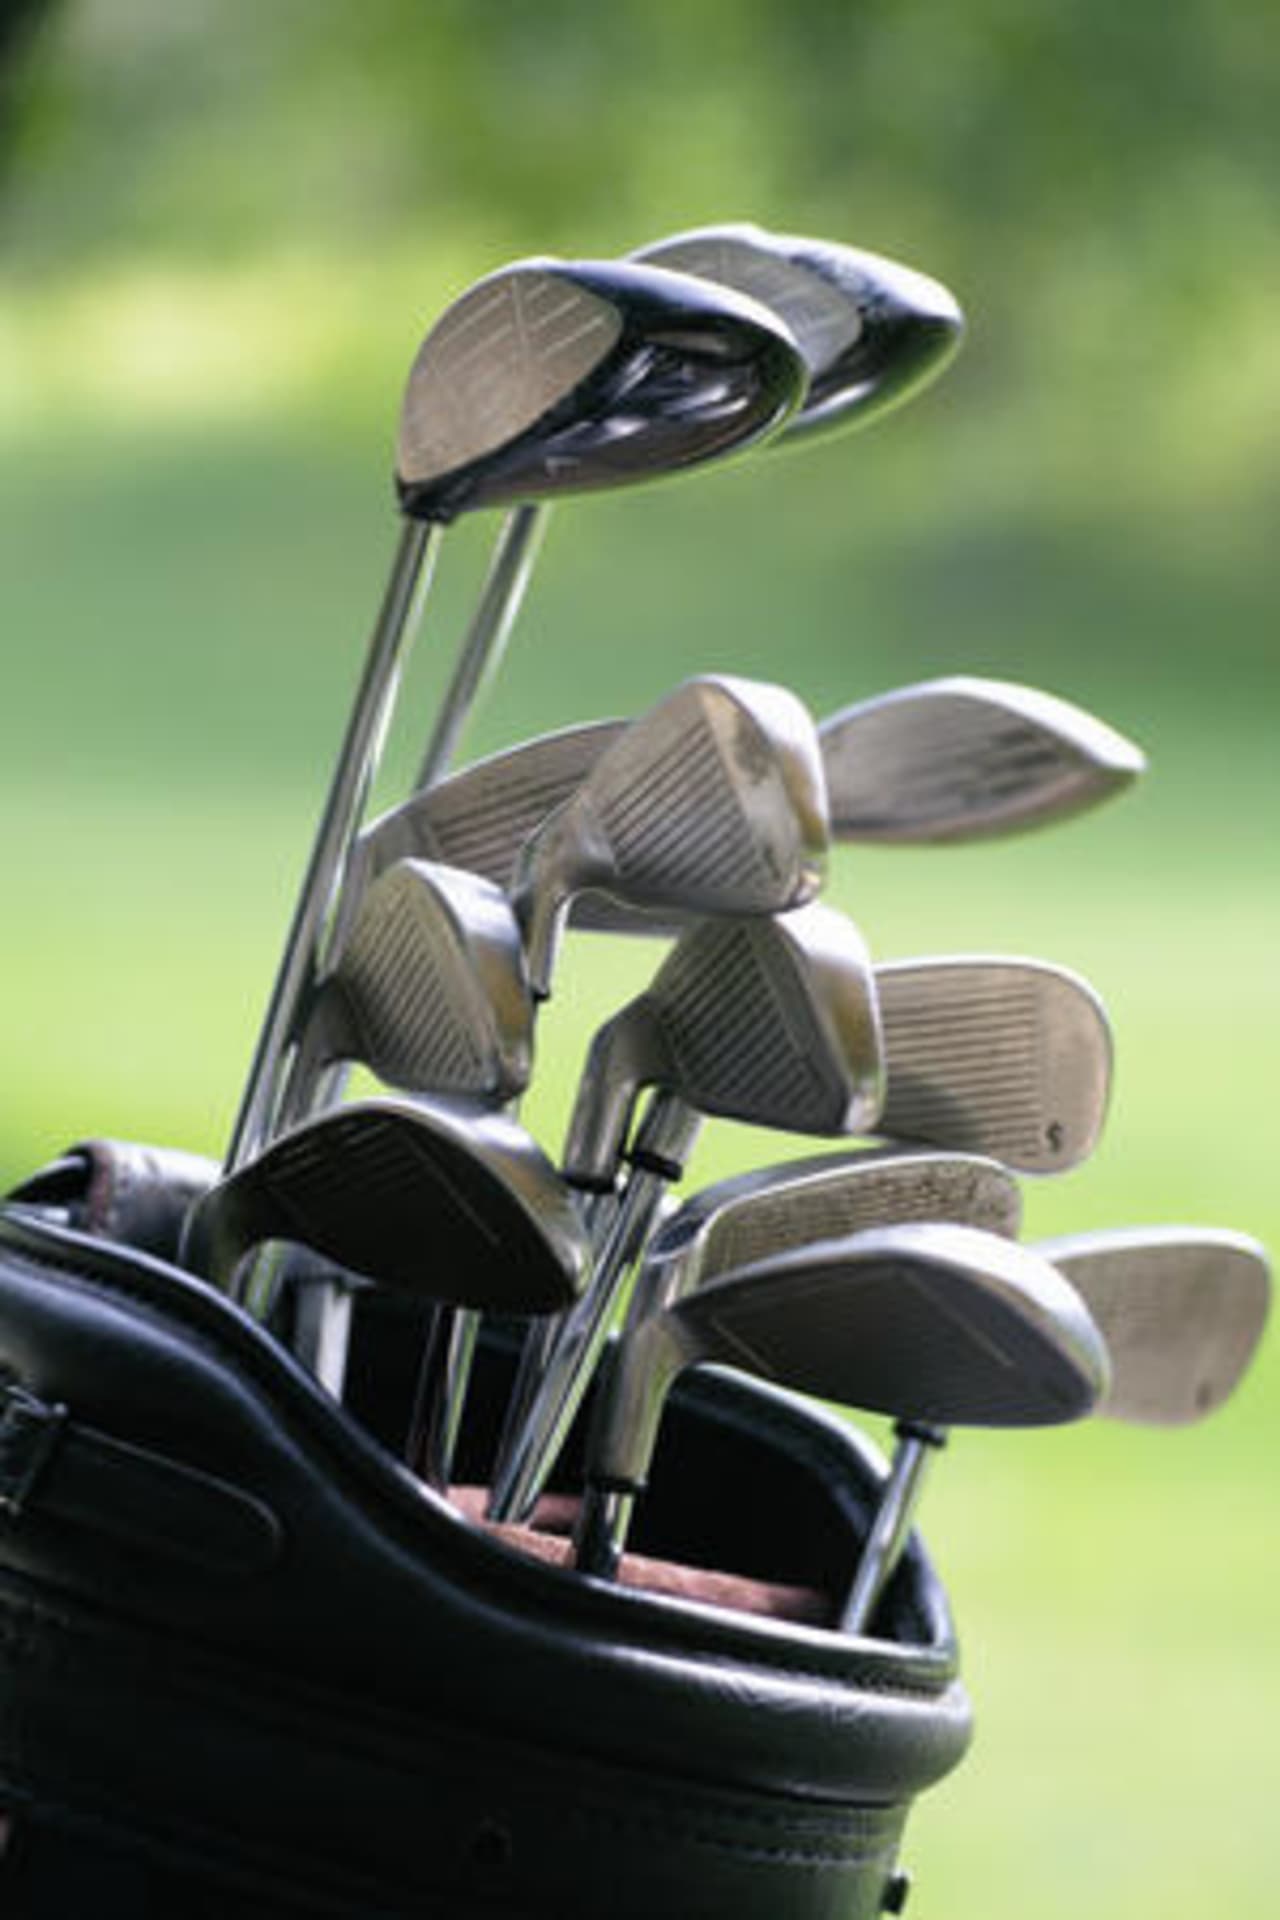 Waveny Care Network in New Canaan will hold a golf and tennis outing on May 20 at the Country Club of New Canaan.